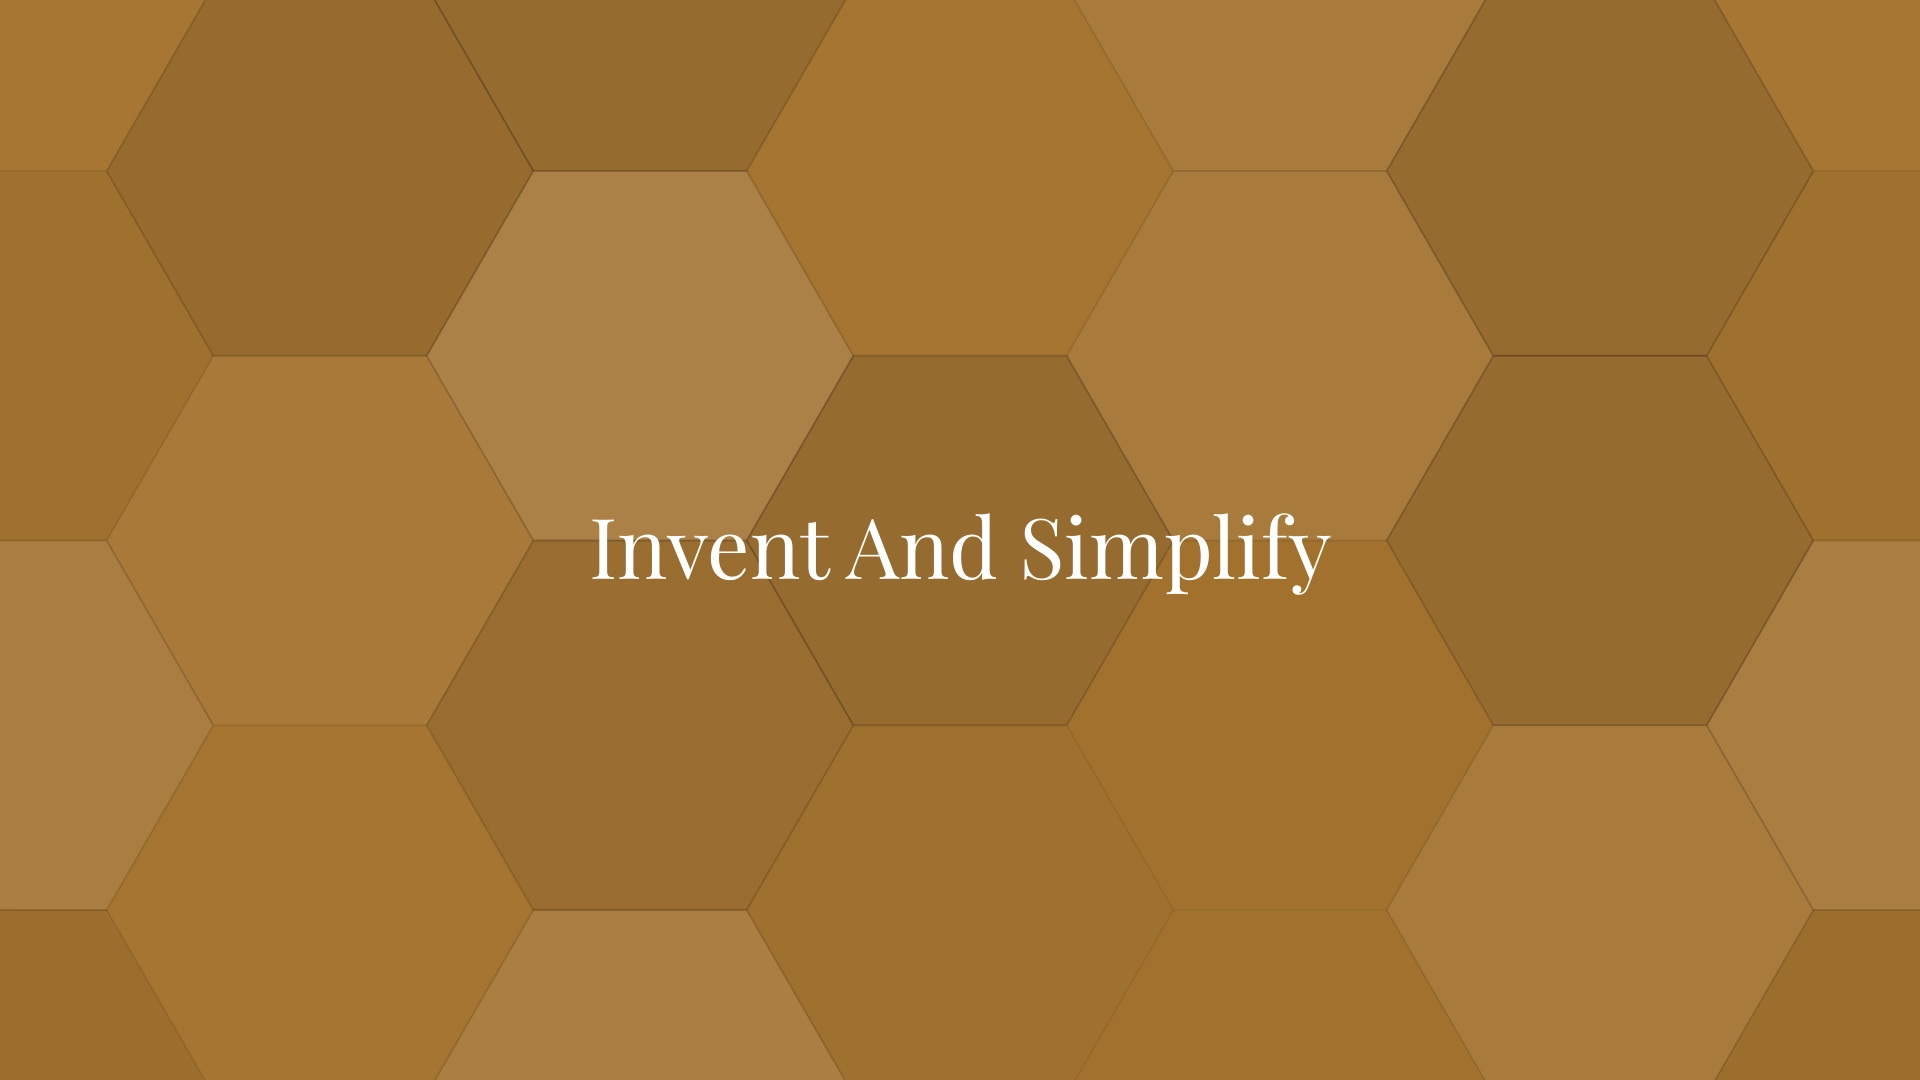 Invent And Simplify